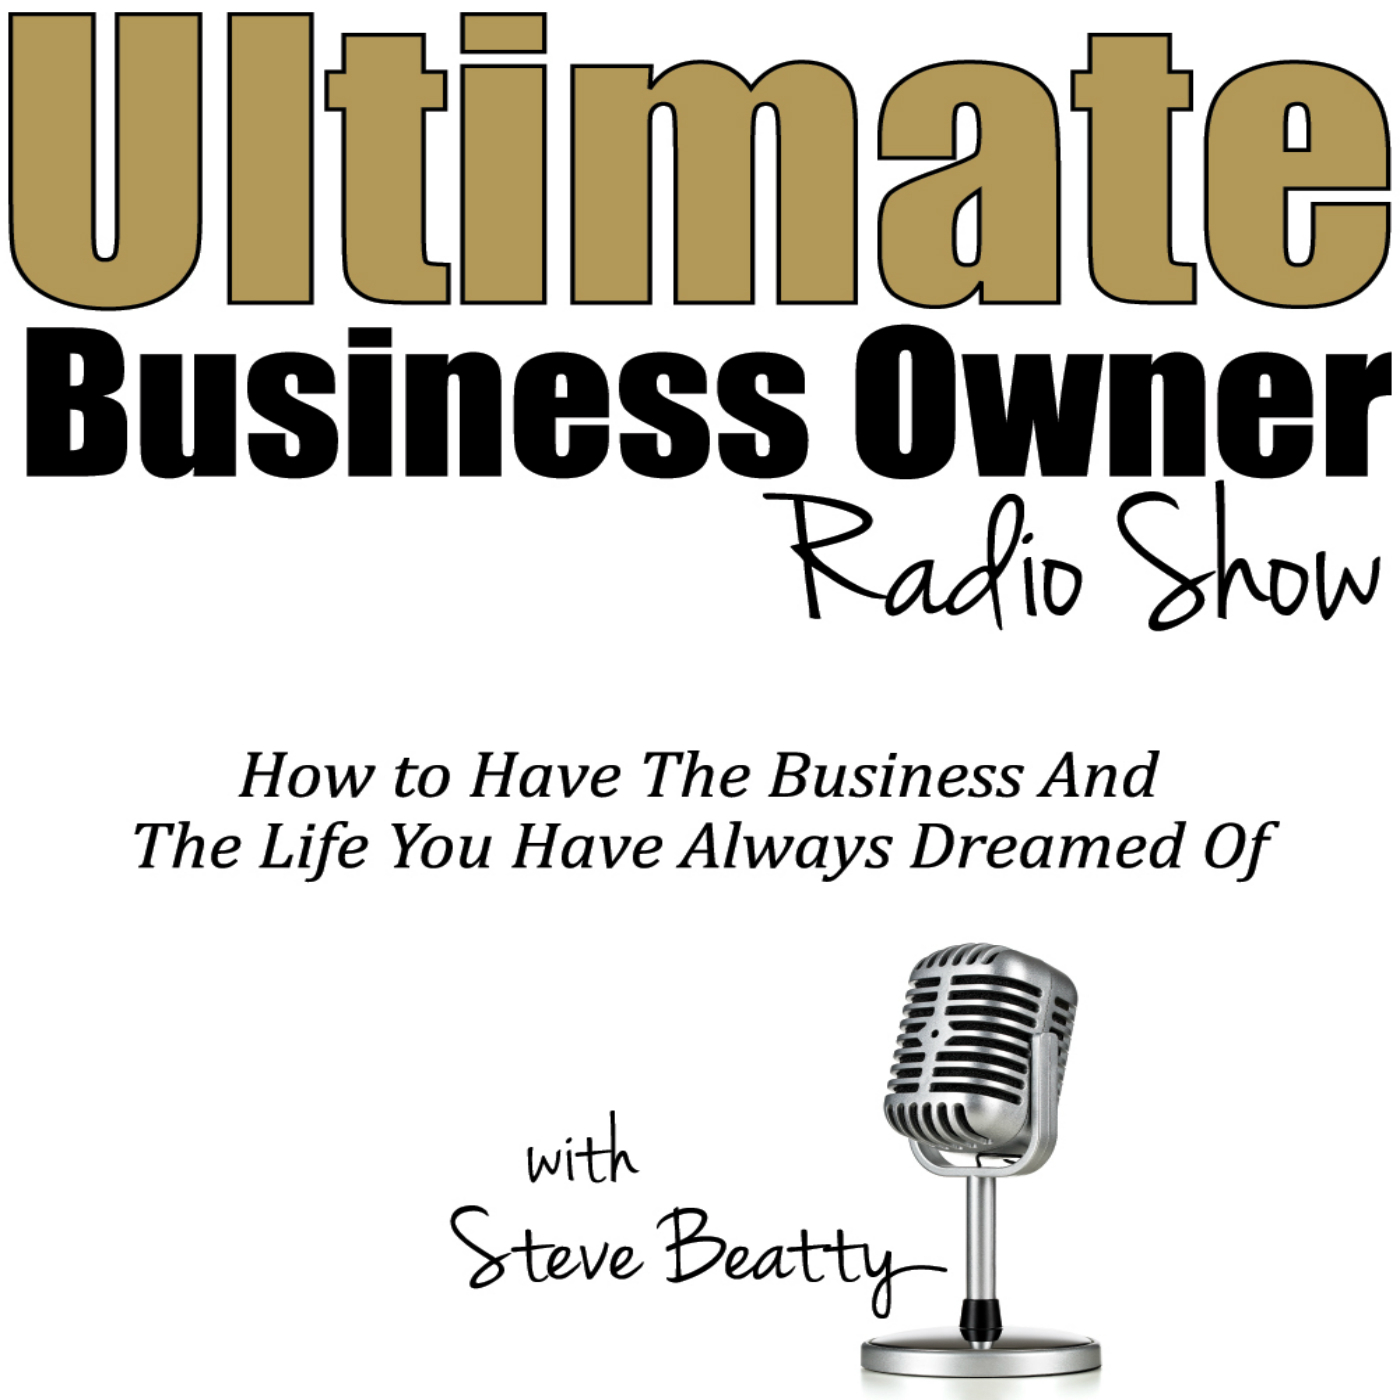 Ultimate Business Owner 20M Interview: Owners &amp; Business Management - Dan Yount